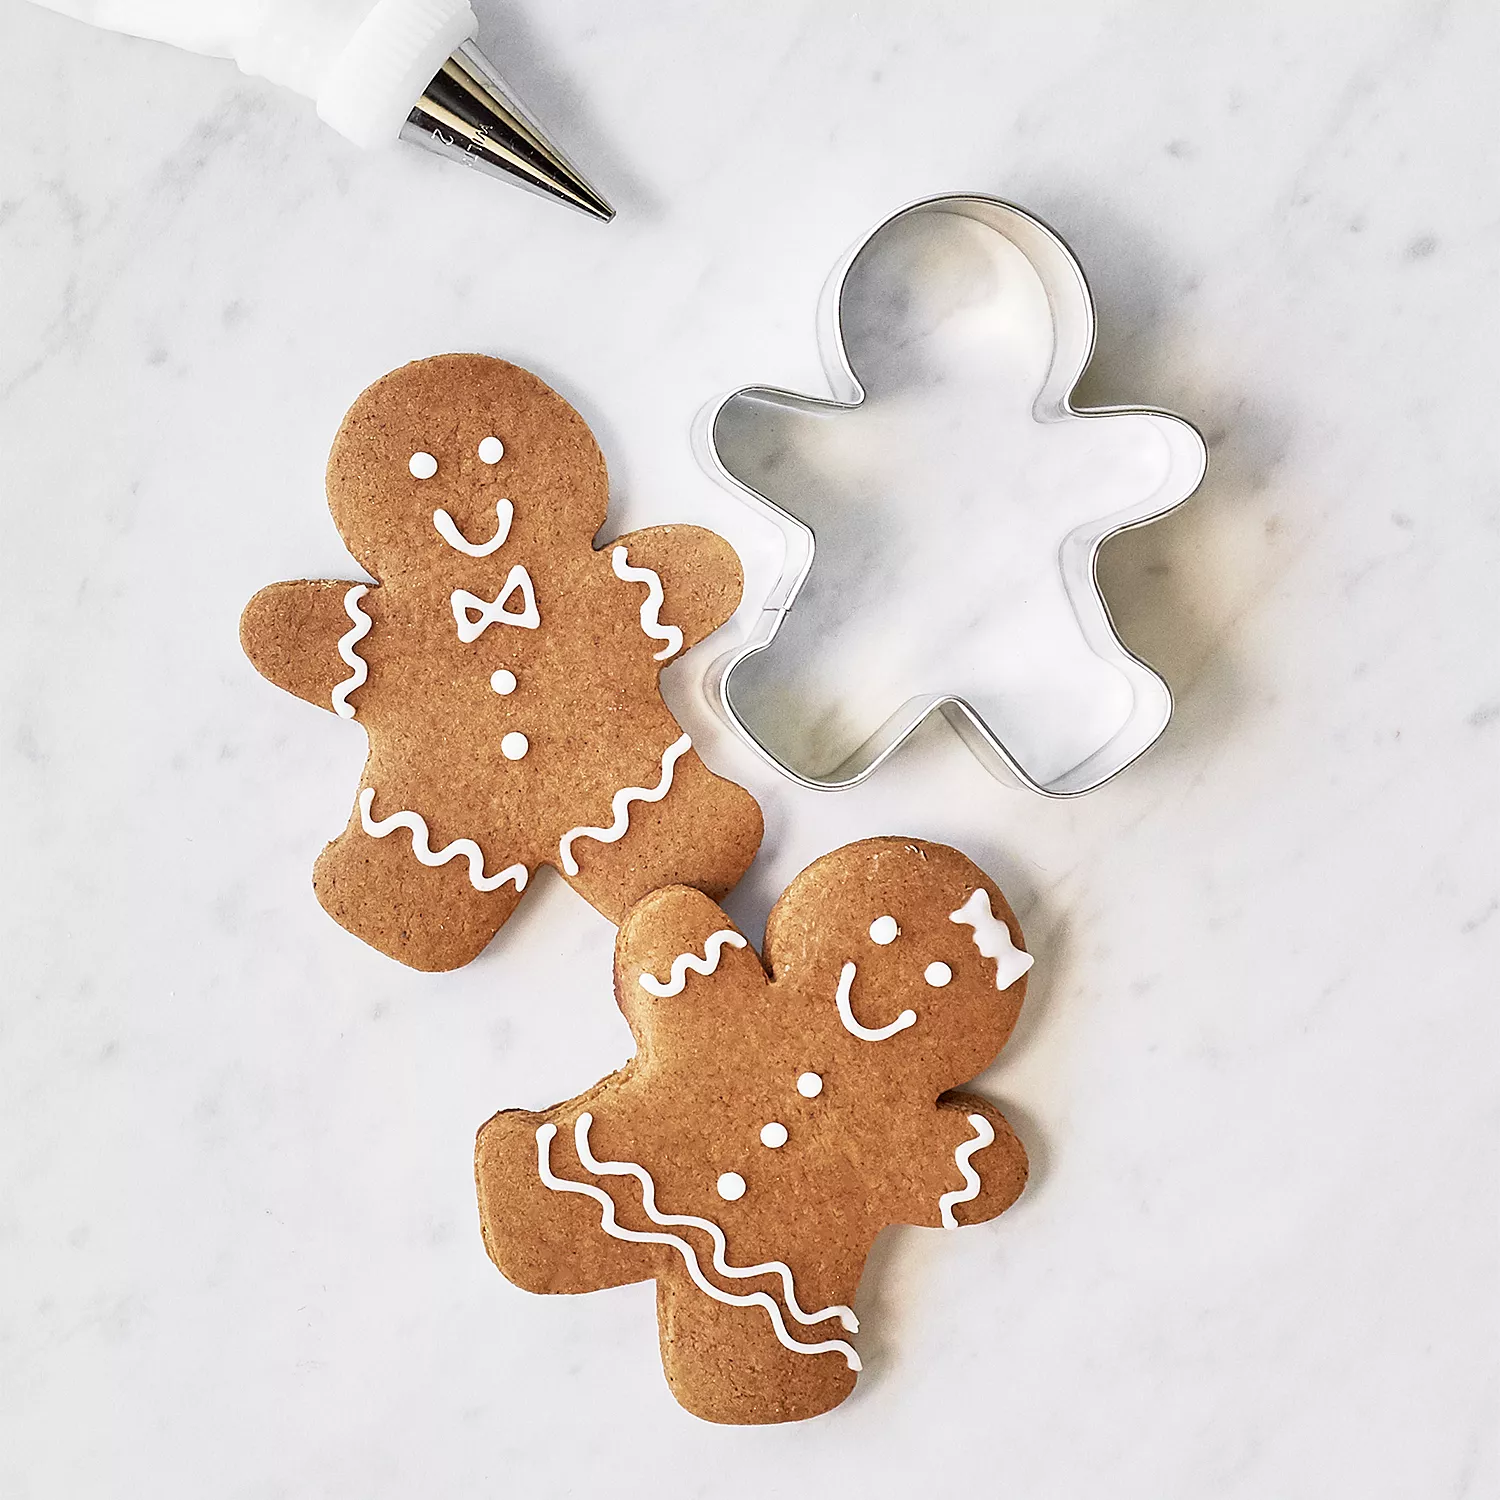 Sur La Table Gingerbread Cookie Mix with Icing Mix & Gingerbread Cookie Cutter